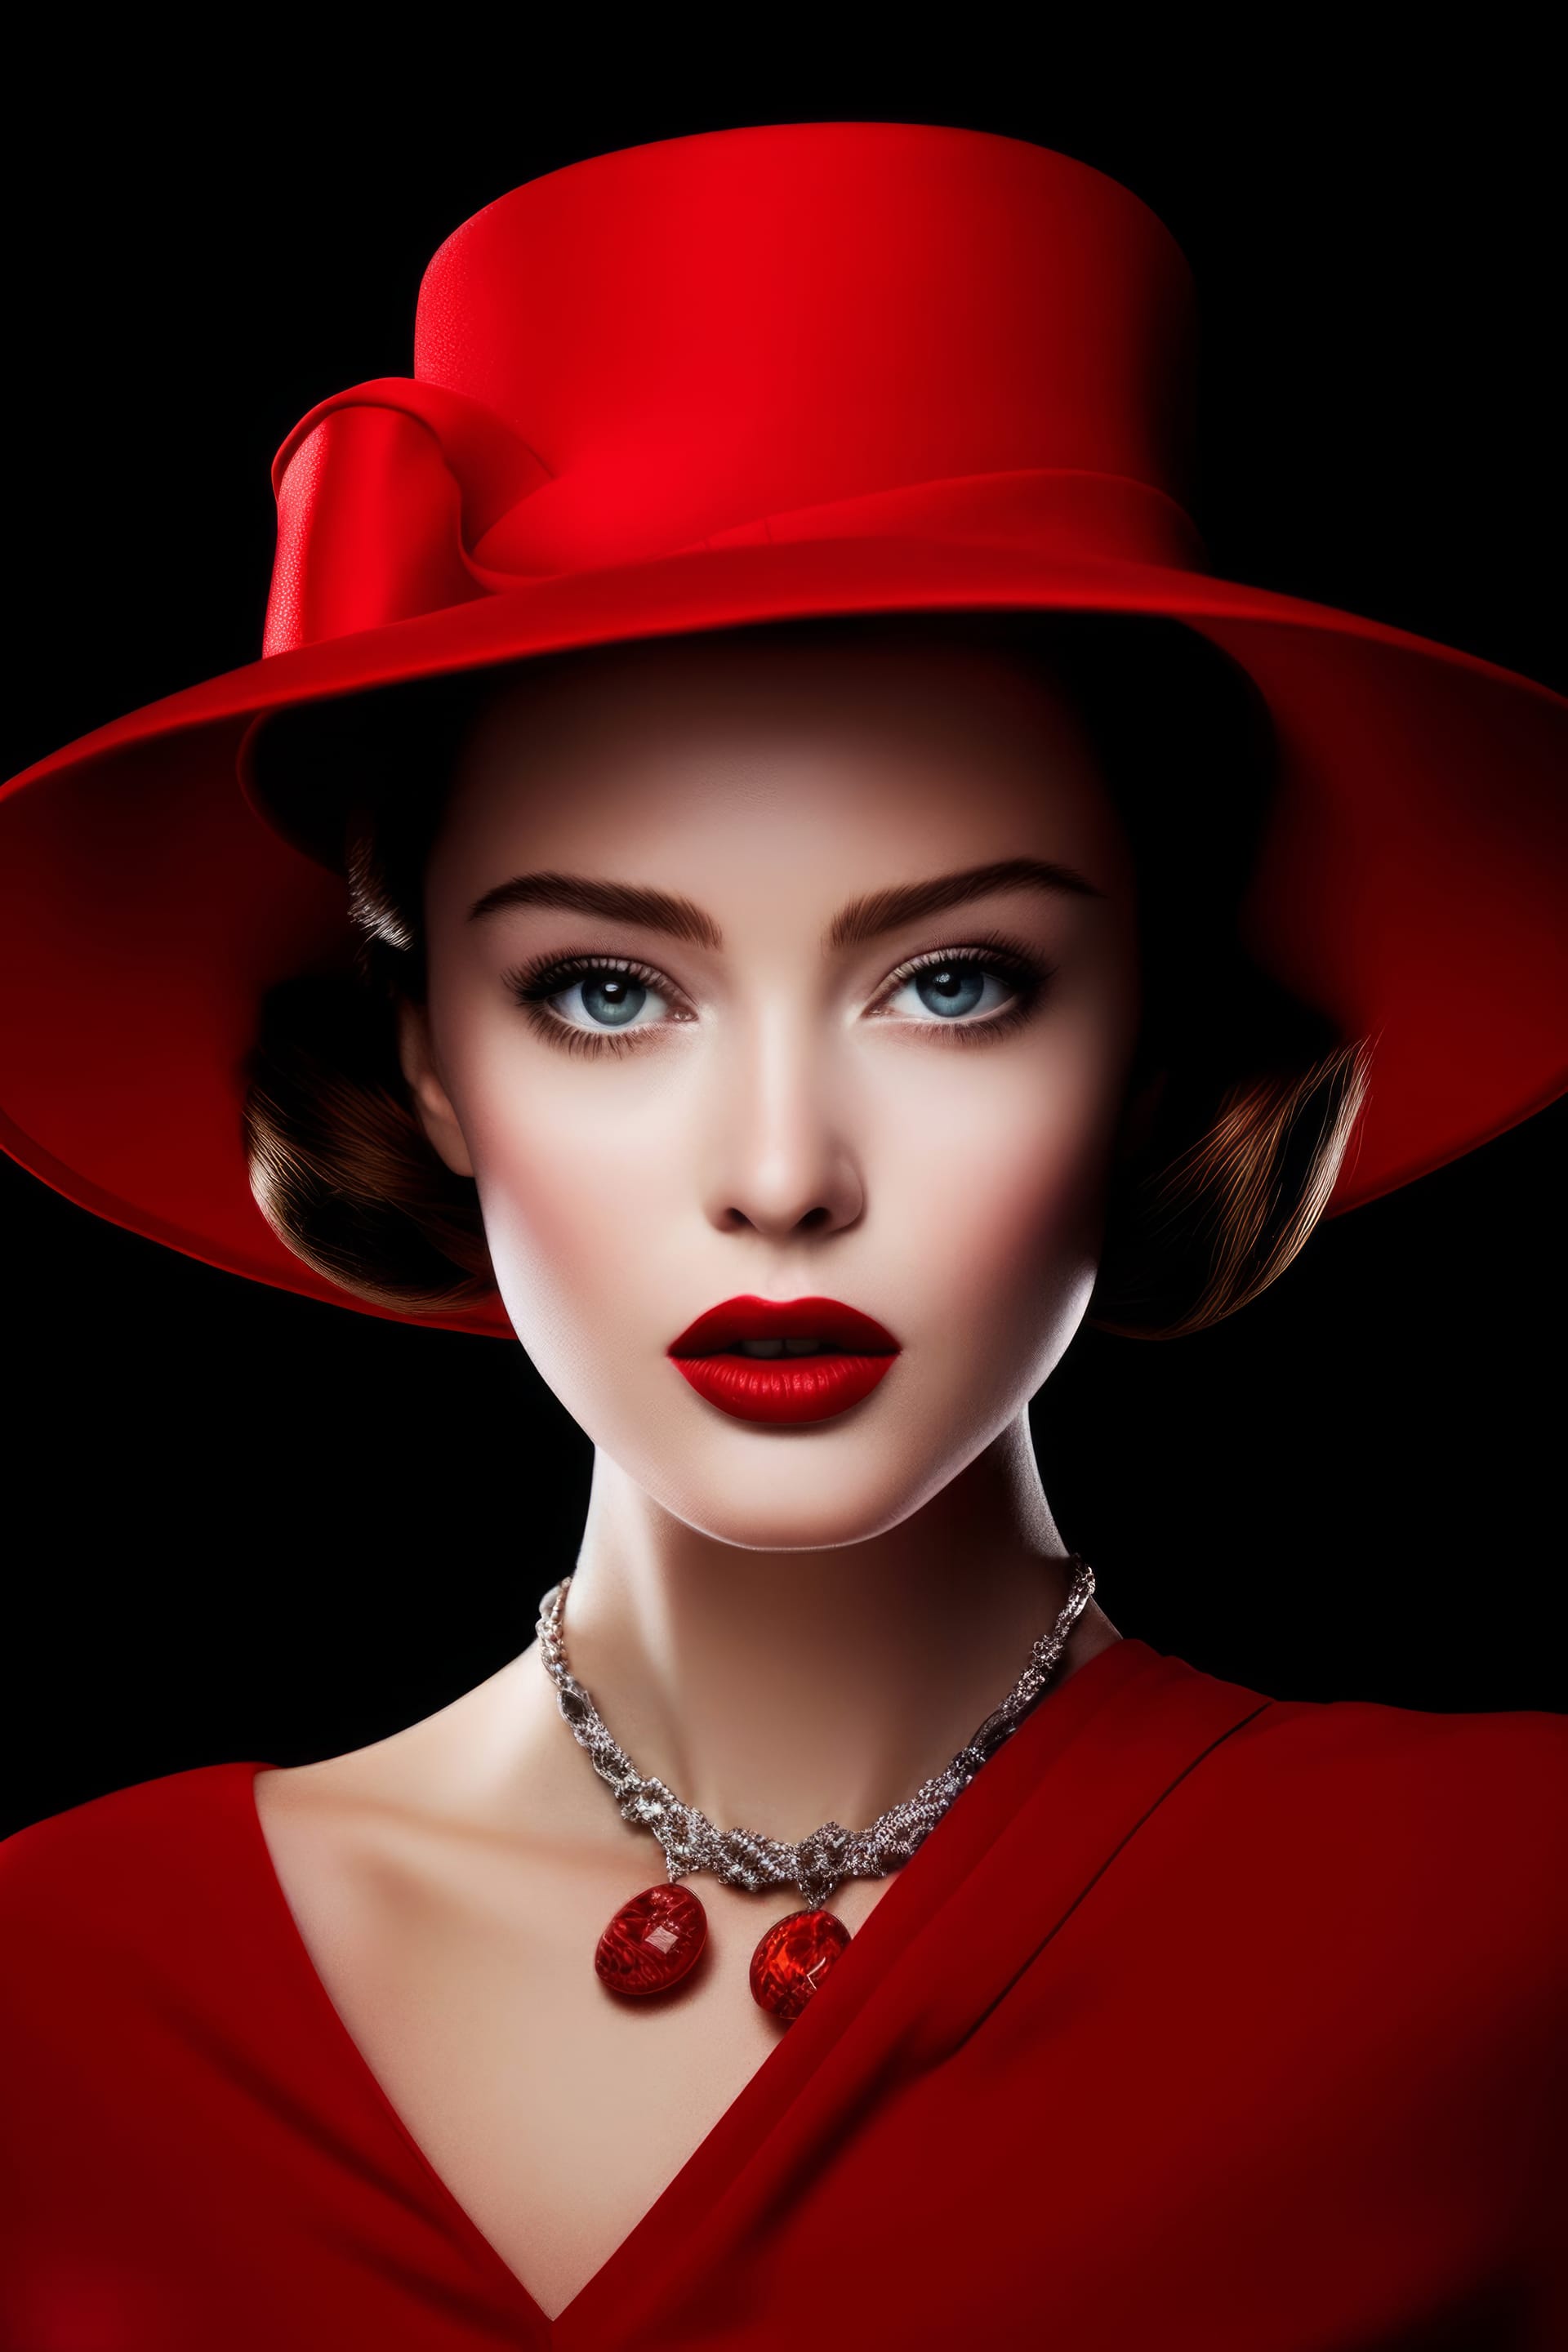 Best profile picture for facebook beautiful woman red hat red lipstick